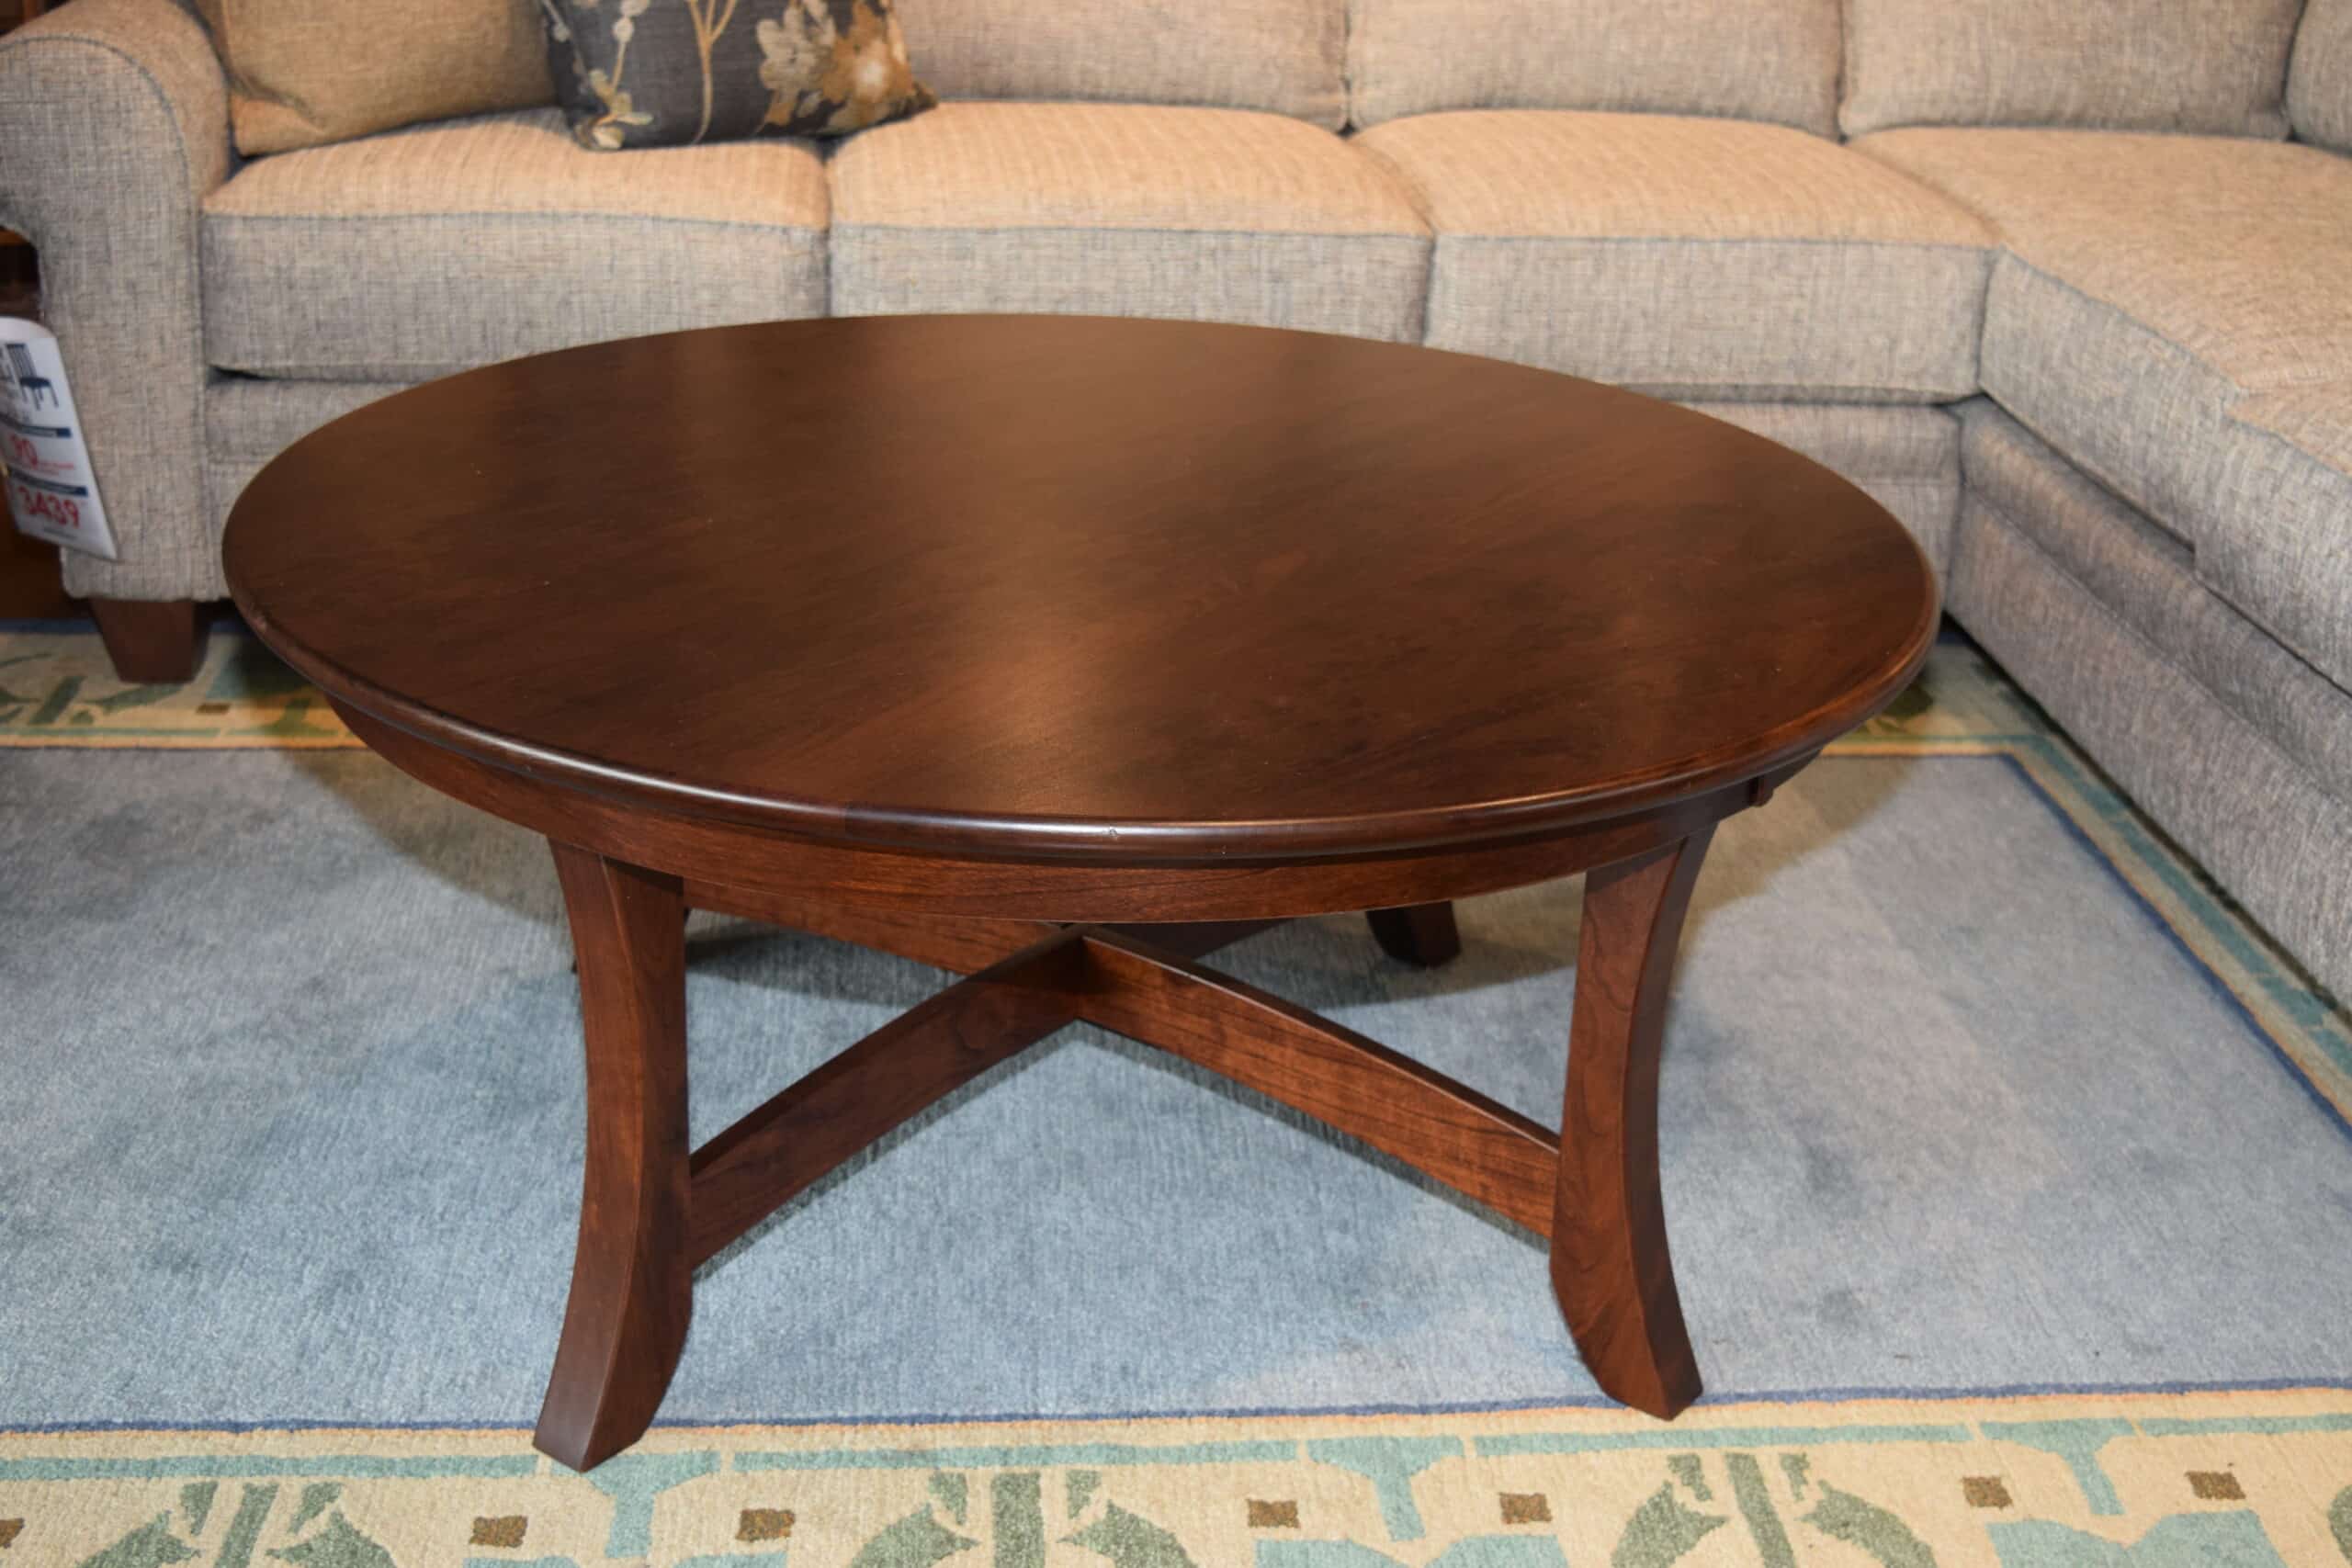 C19-CA Coffee Table [50% Off]